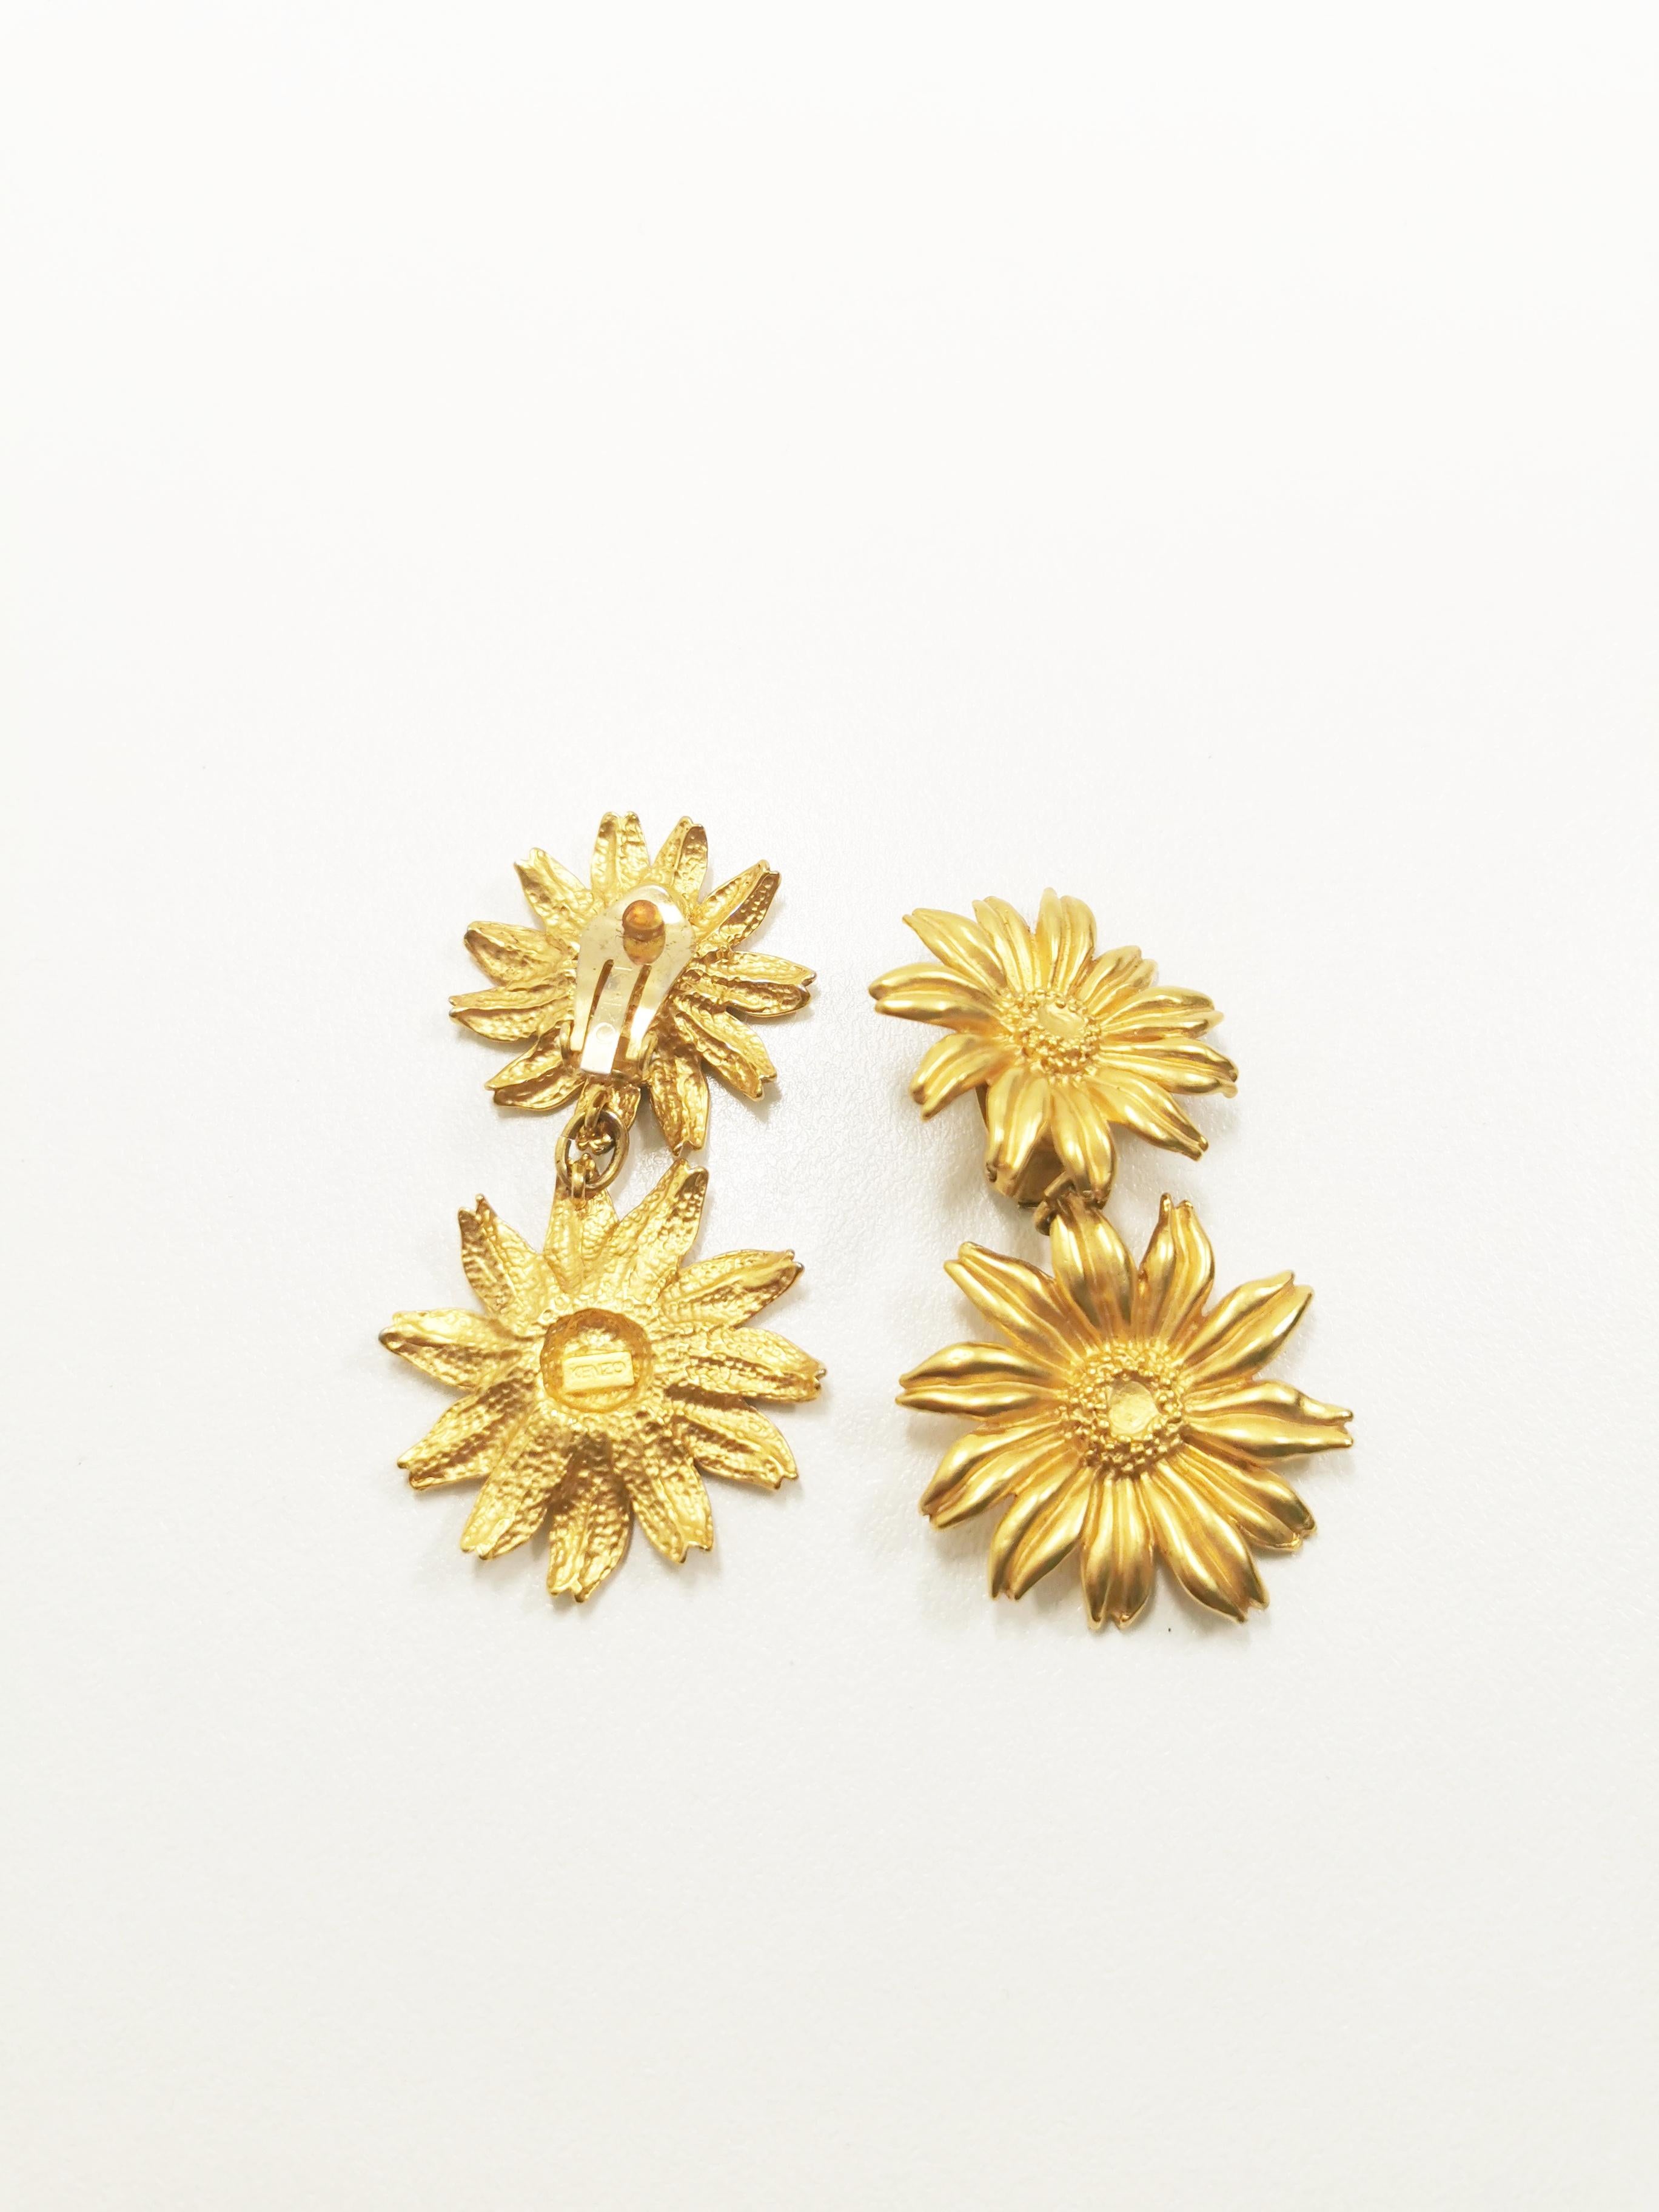 Introducing the epitome of timeless elegance and bohemian charm, the Vintage KENZO Gerbera Flower Dangle Clip-On Gilded Earrings. Crafted with meticulous attention to detail, these exquisite earrings capture the essence of a bygone era, seamlessly